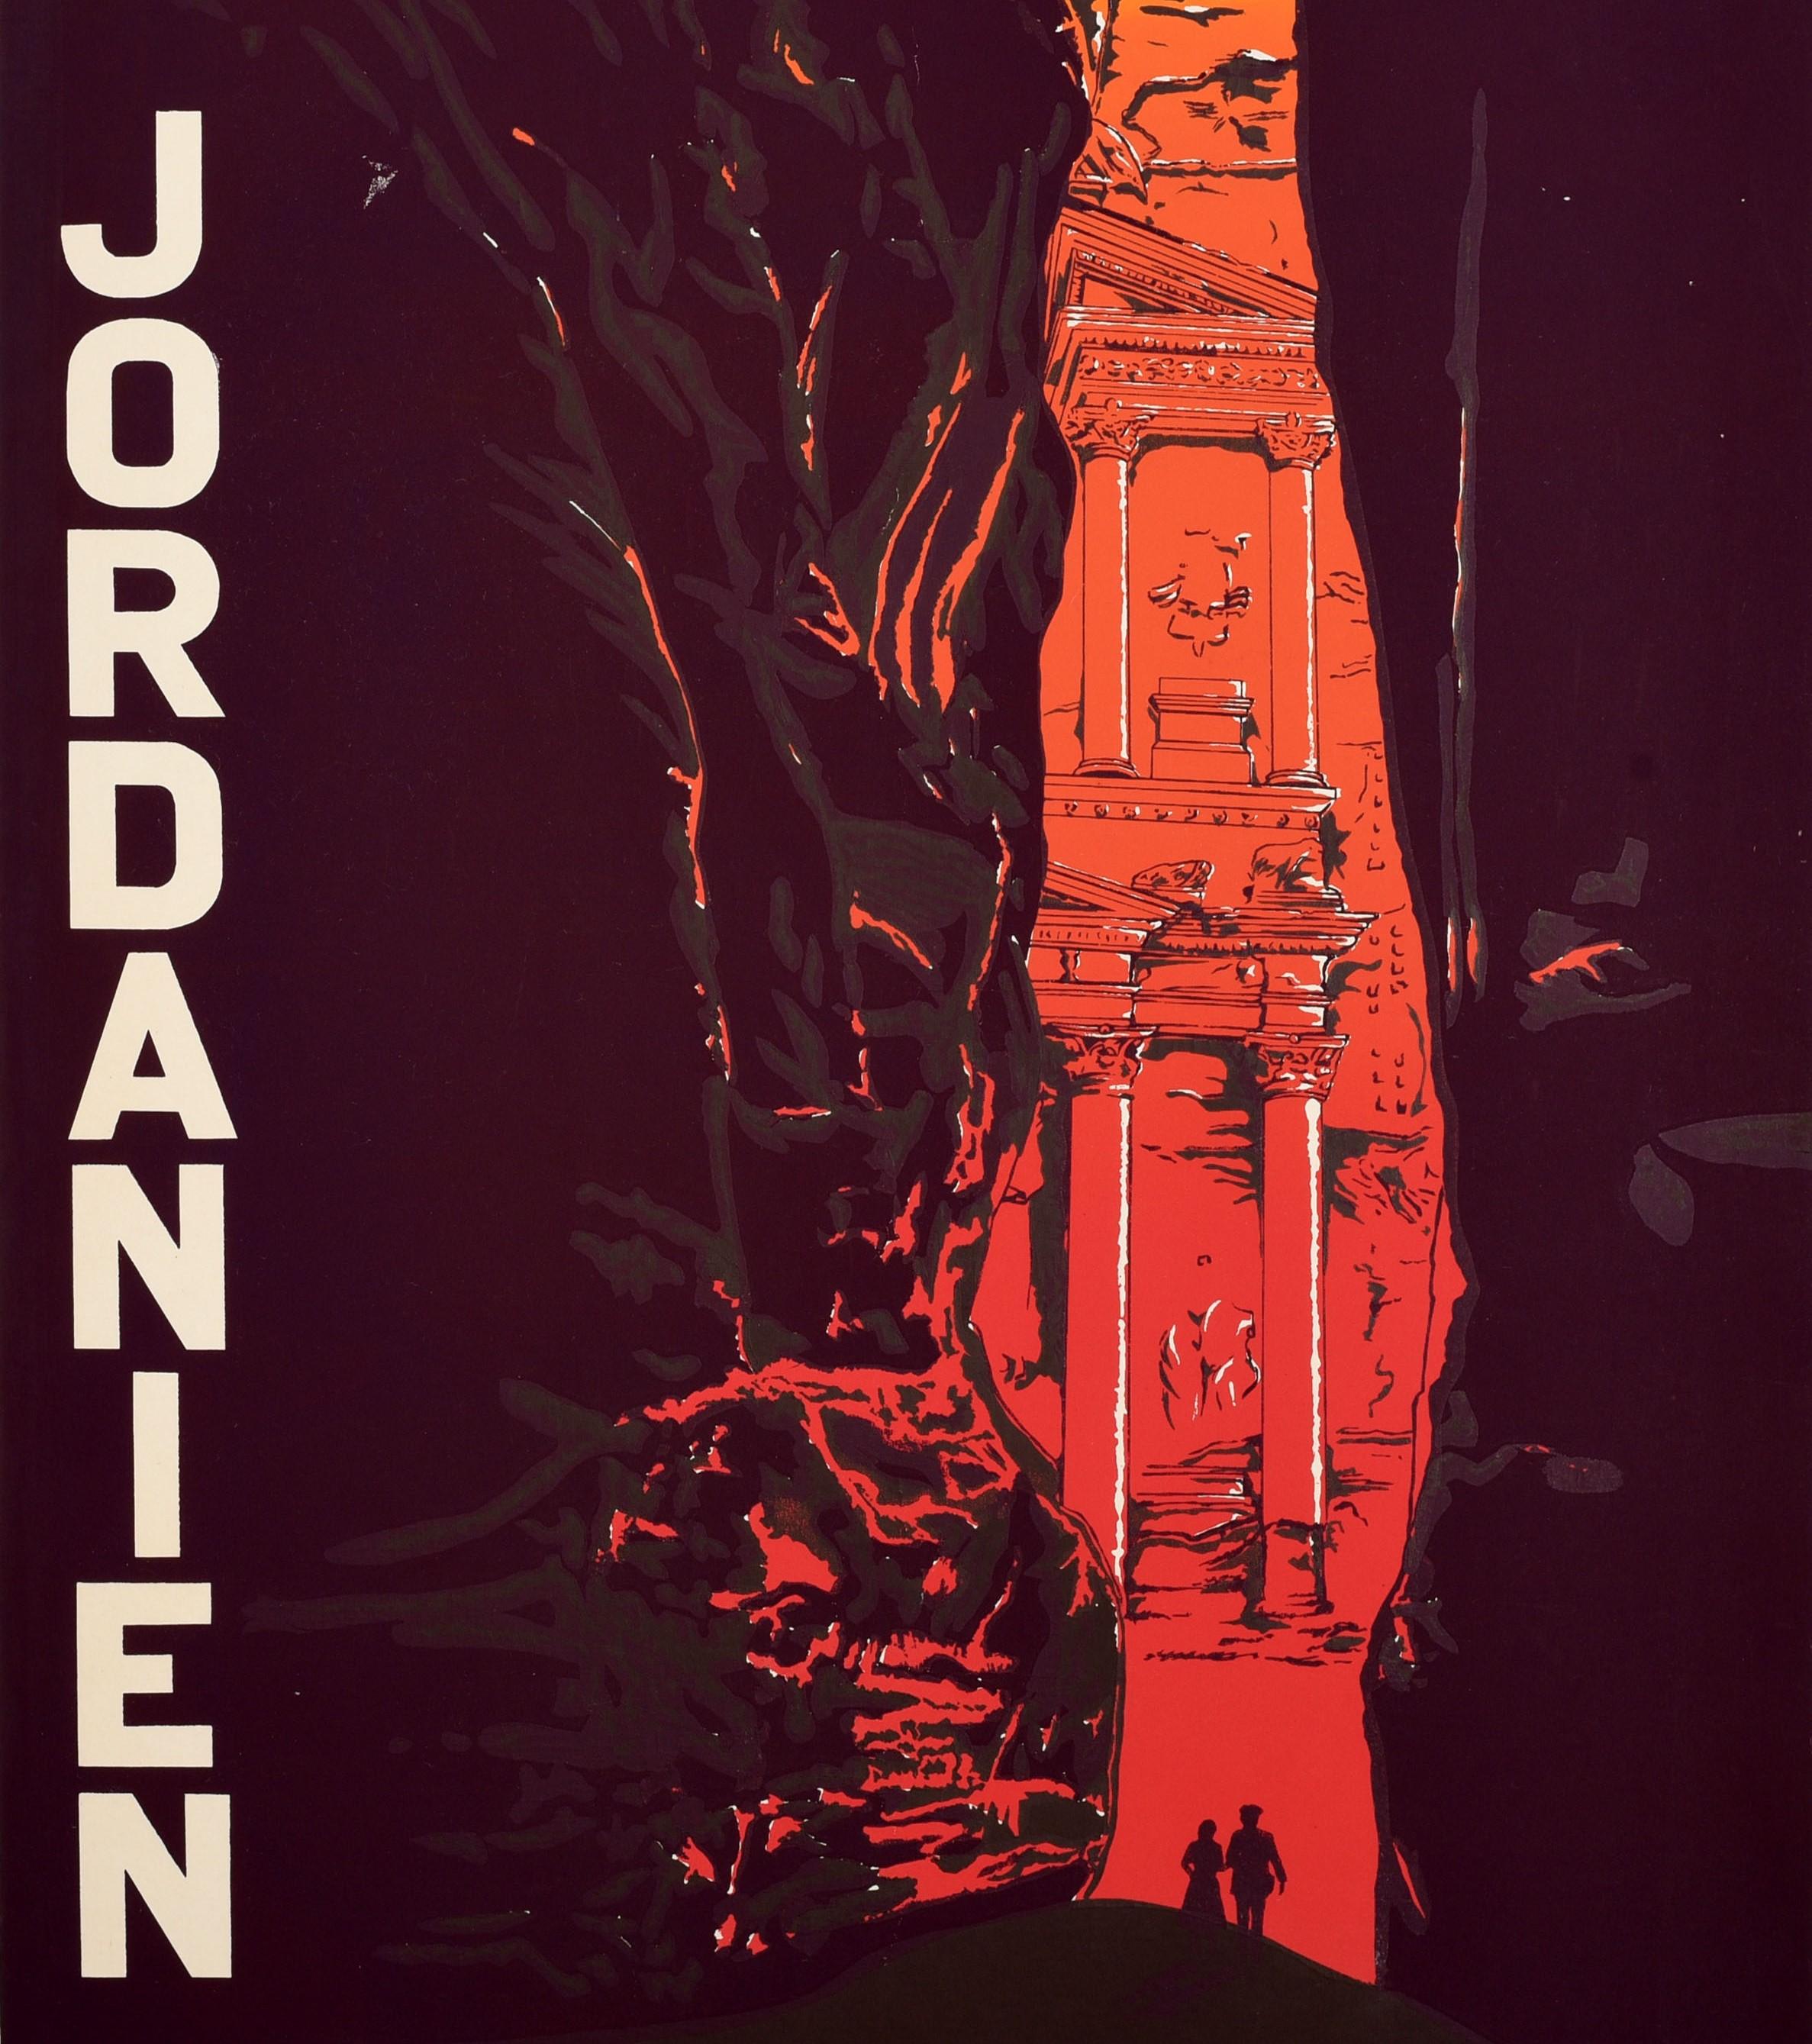 Original Vintage Travel Poster Jordanien Jordan The Holy Land Petra Ancient City In Good Condition For Sale In London, GB